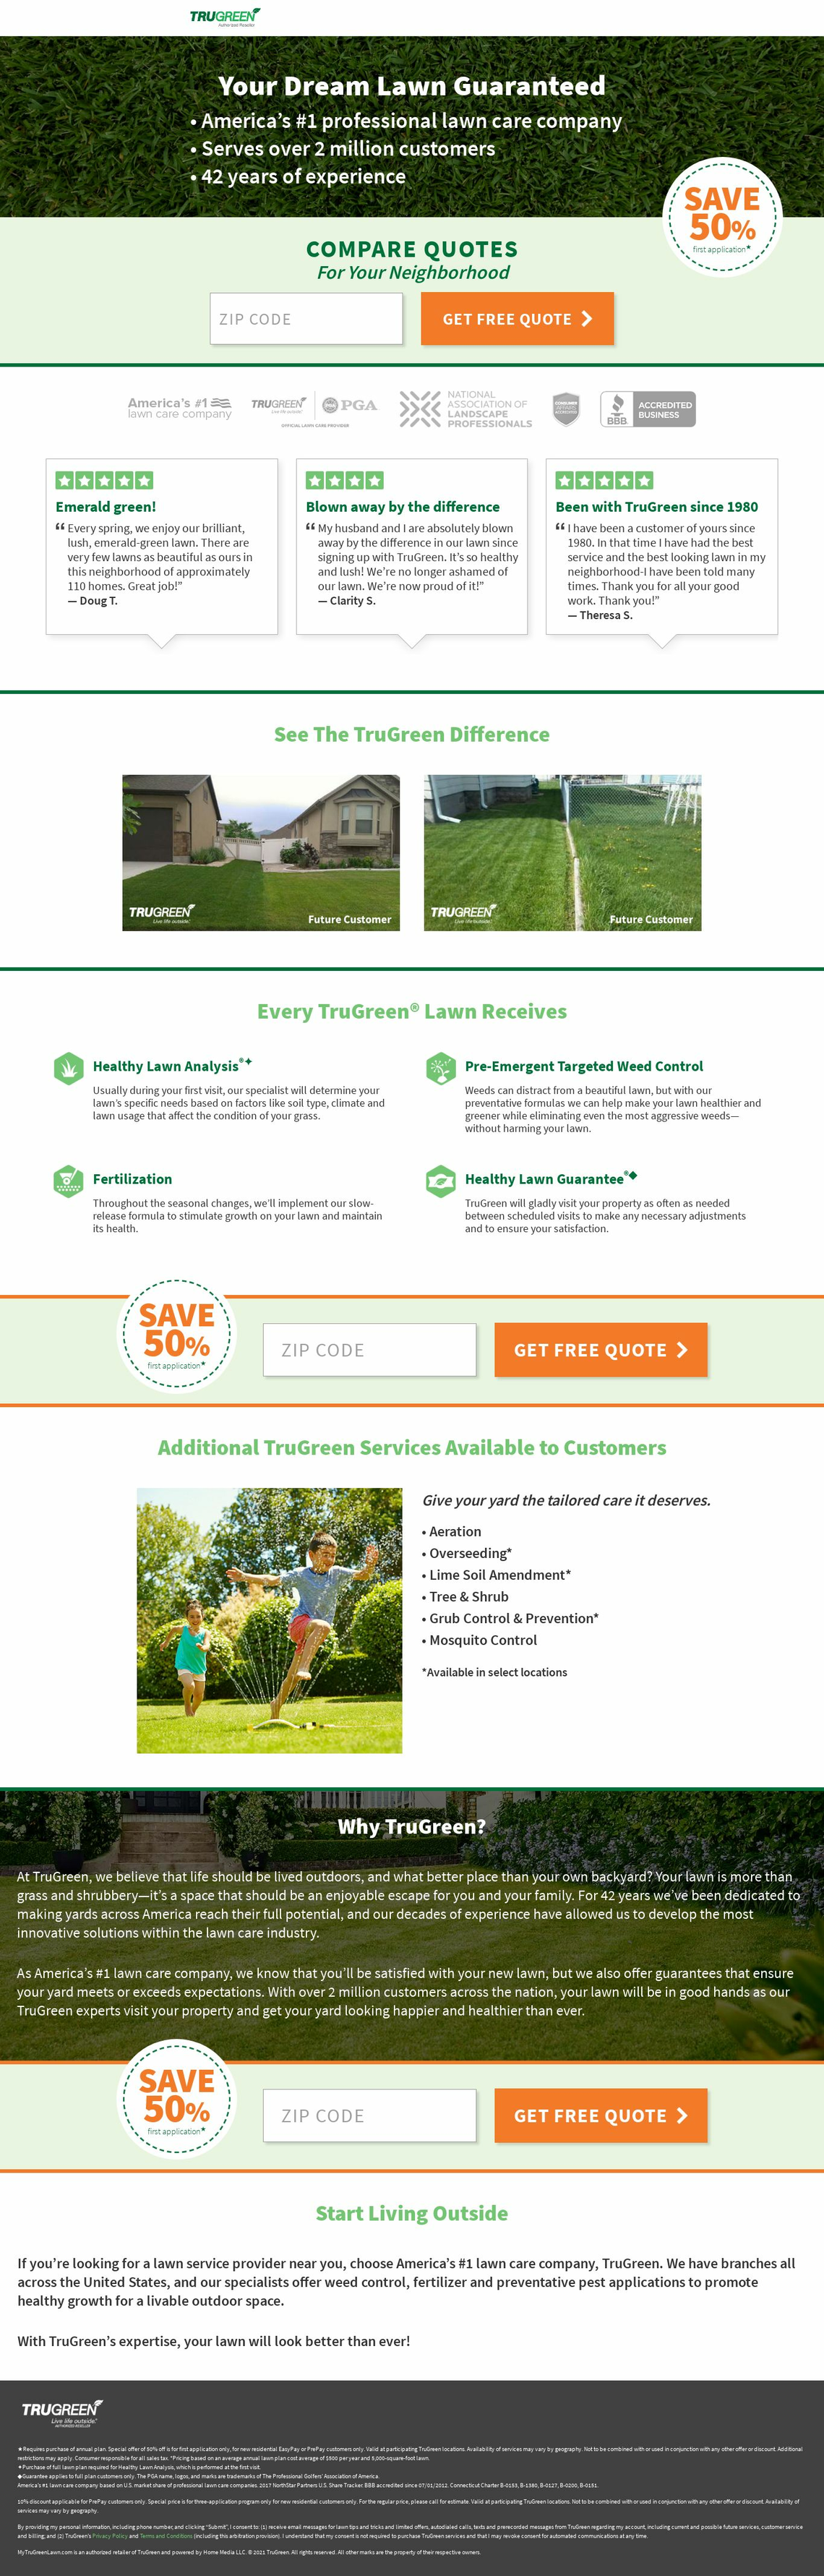 Landing Page Template for Lawn Care - mytrugreenlawn.com